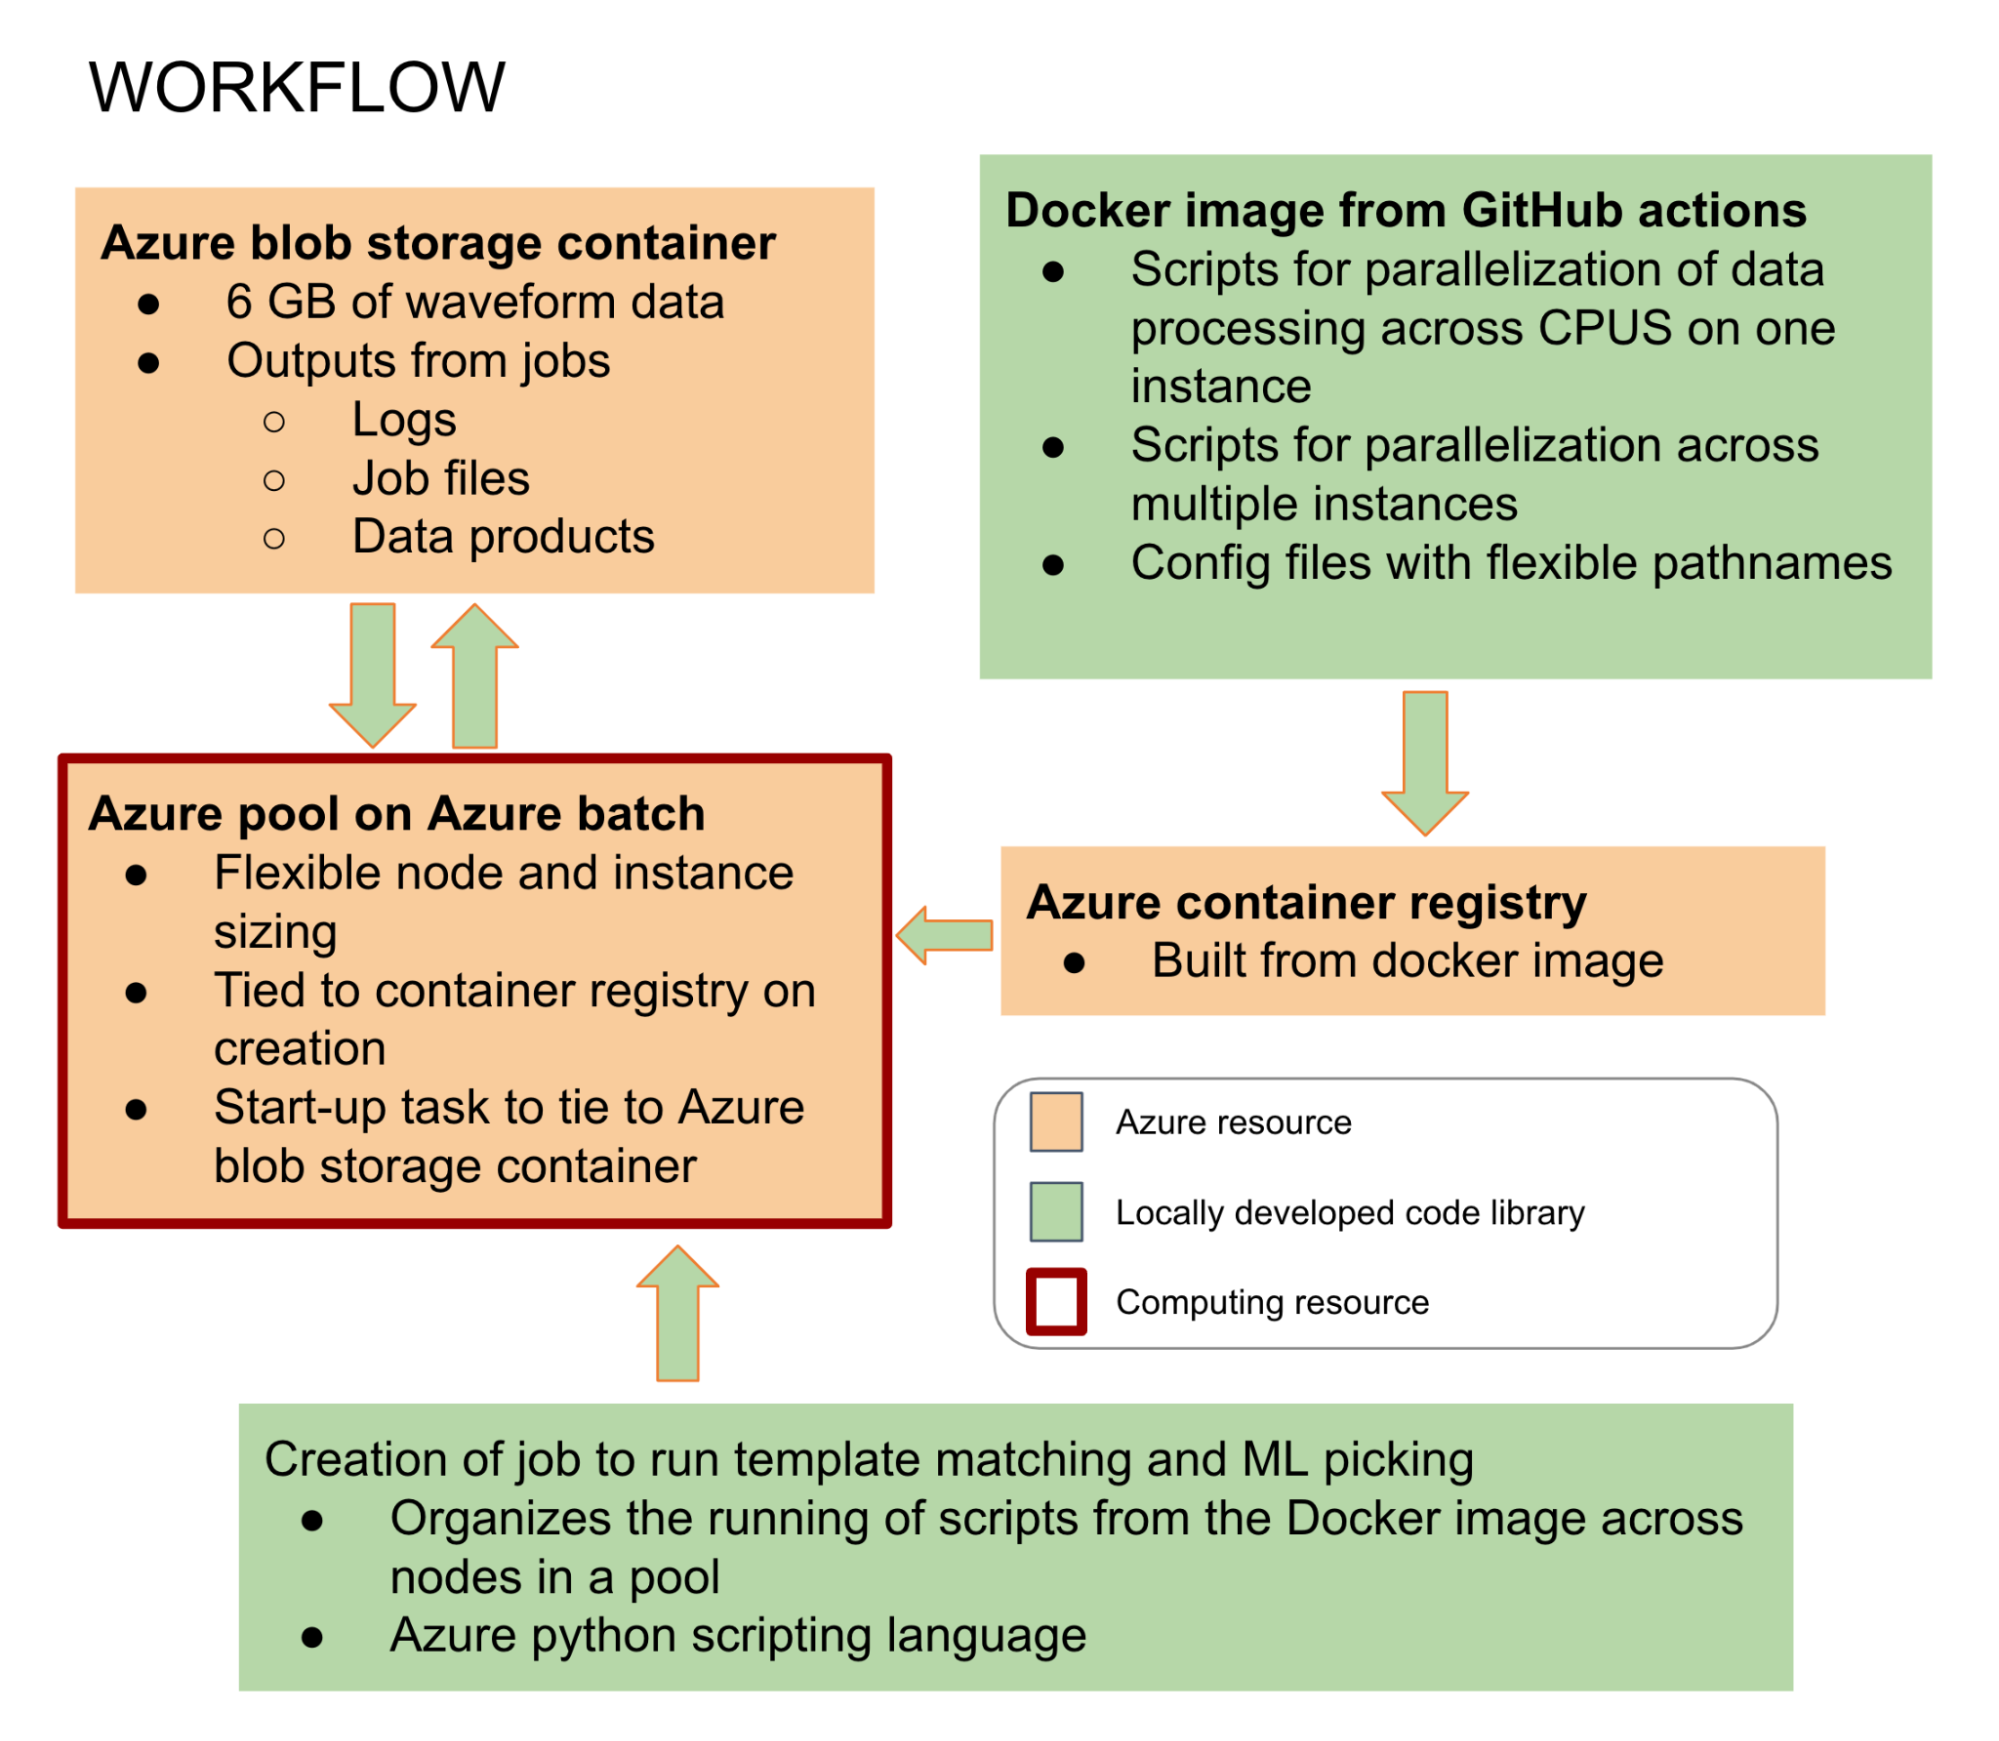 A diagram laying out the cloud workflow described by this use case